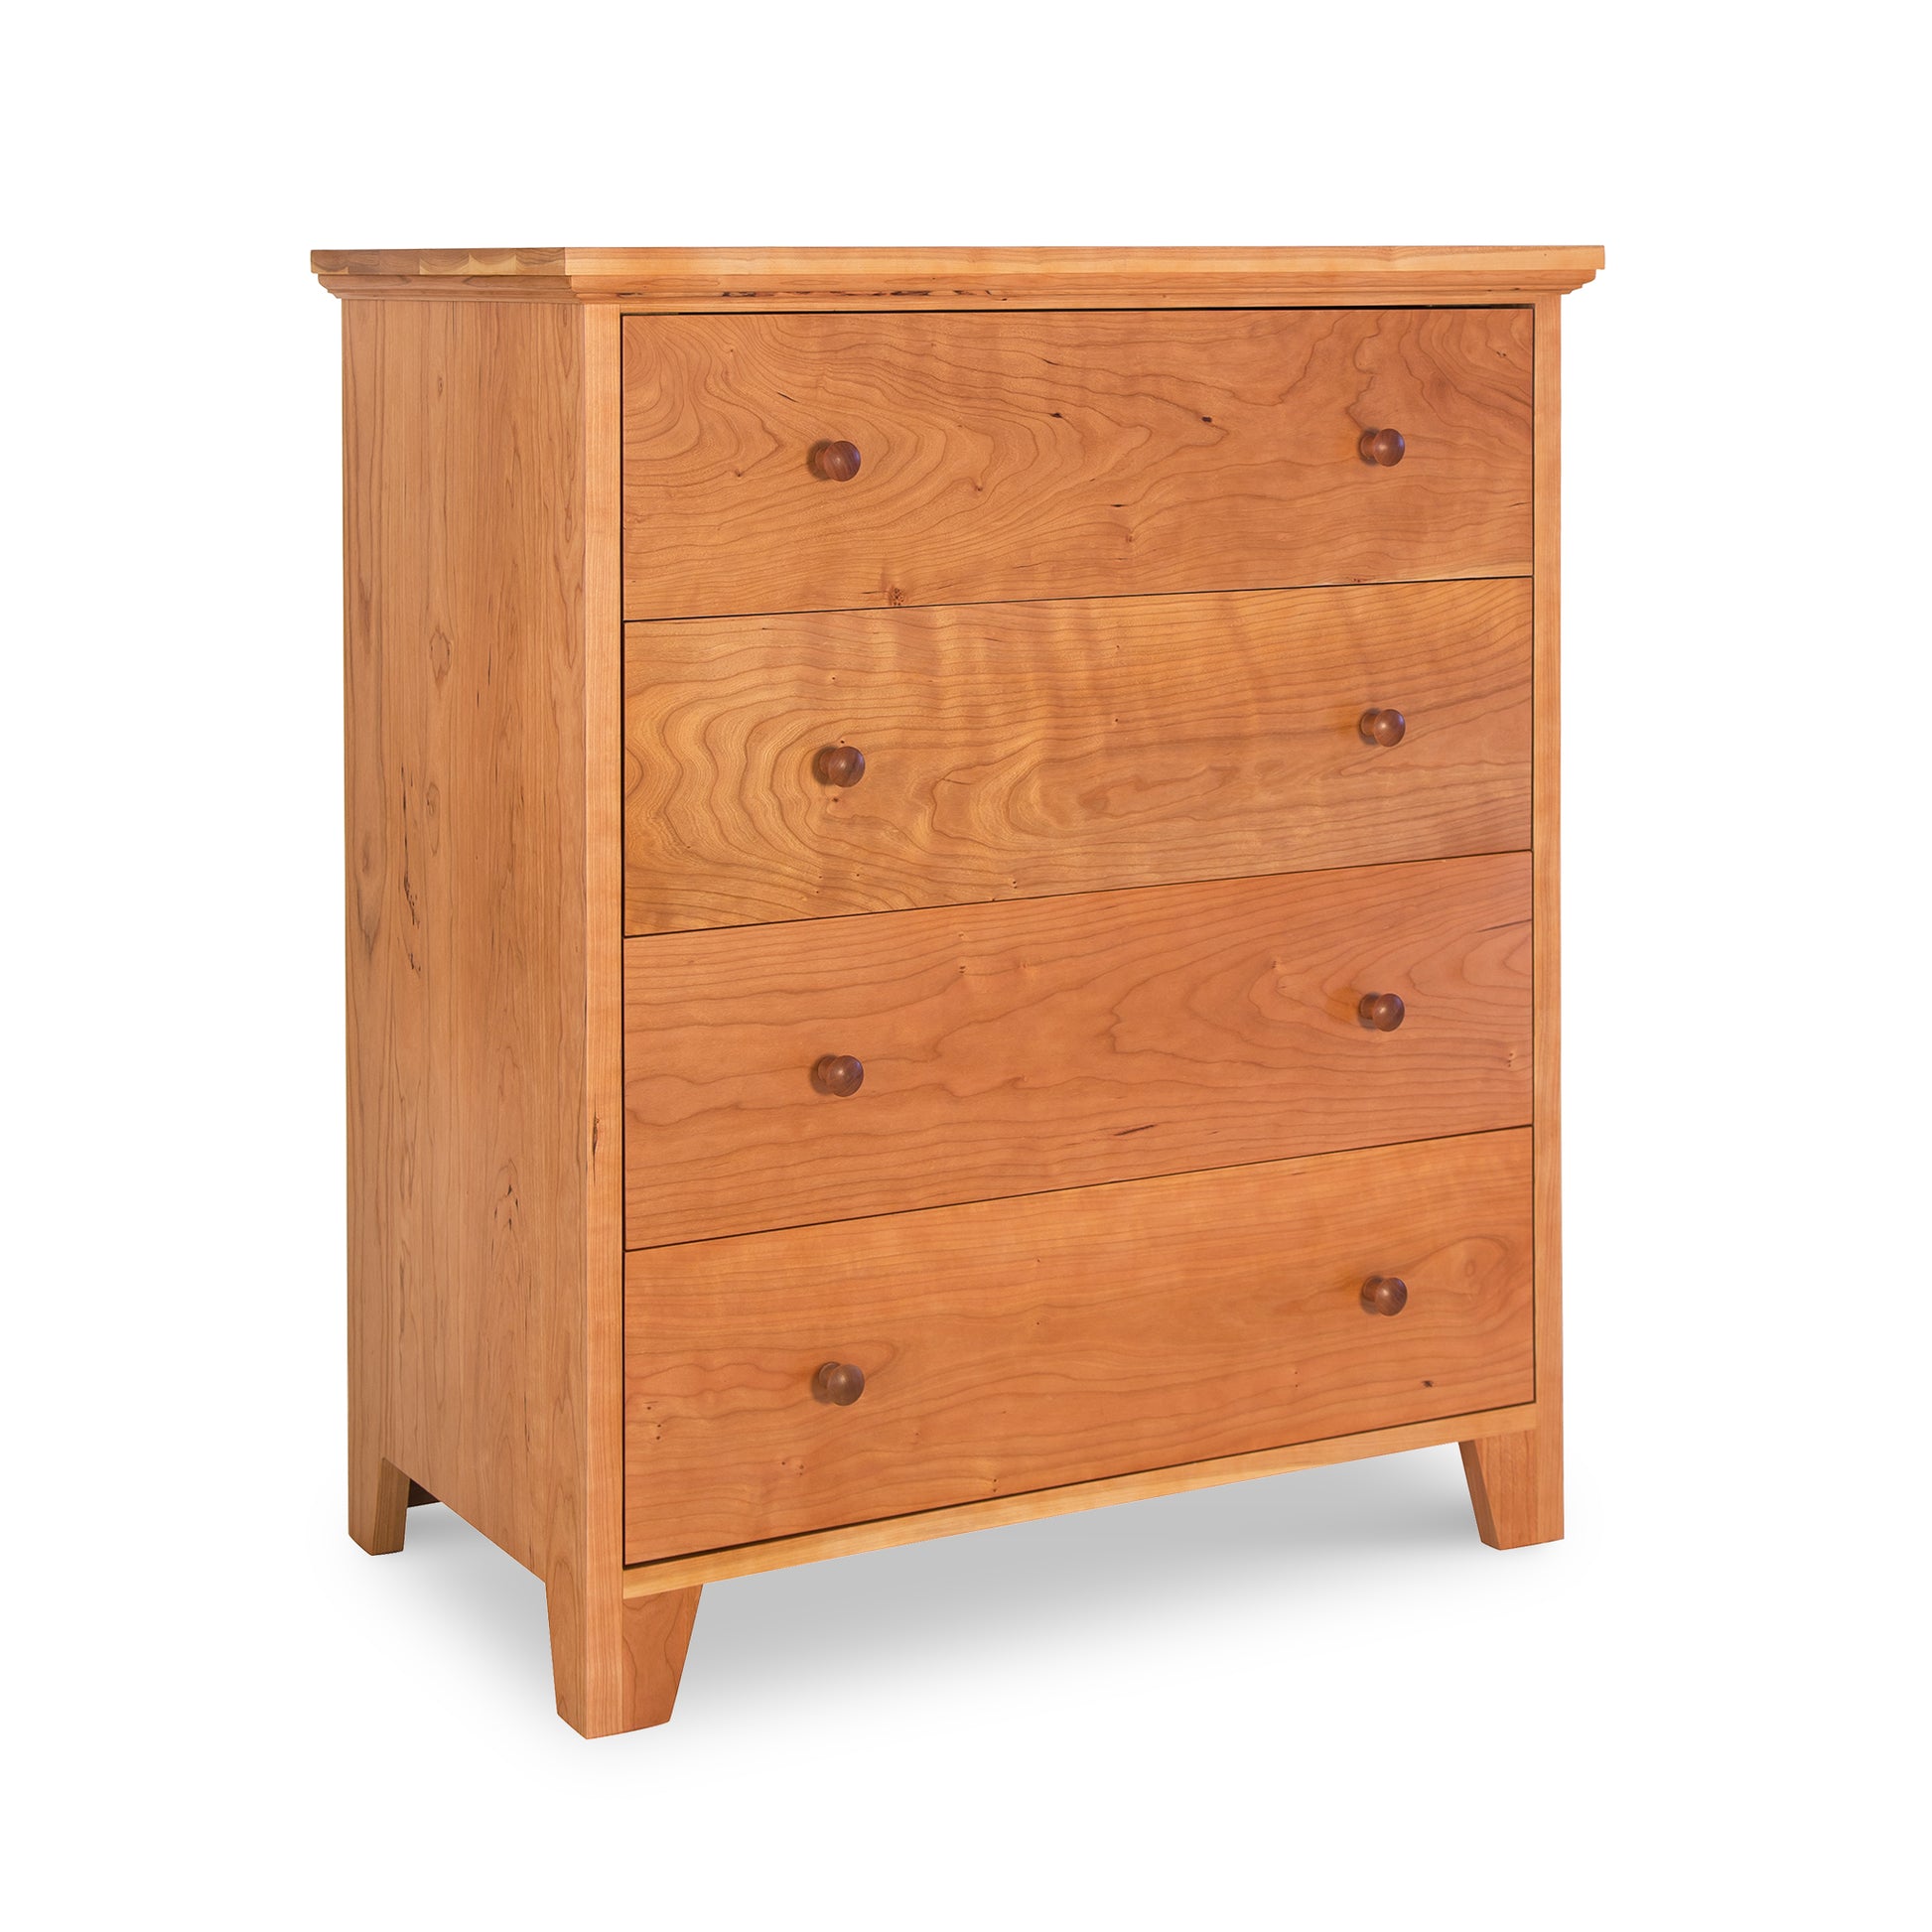 A Lyndon Furniture American Country 4-Drawer Chest made of solid wood on a white background.